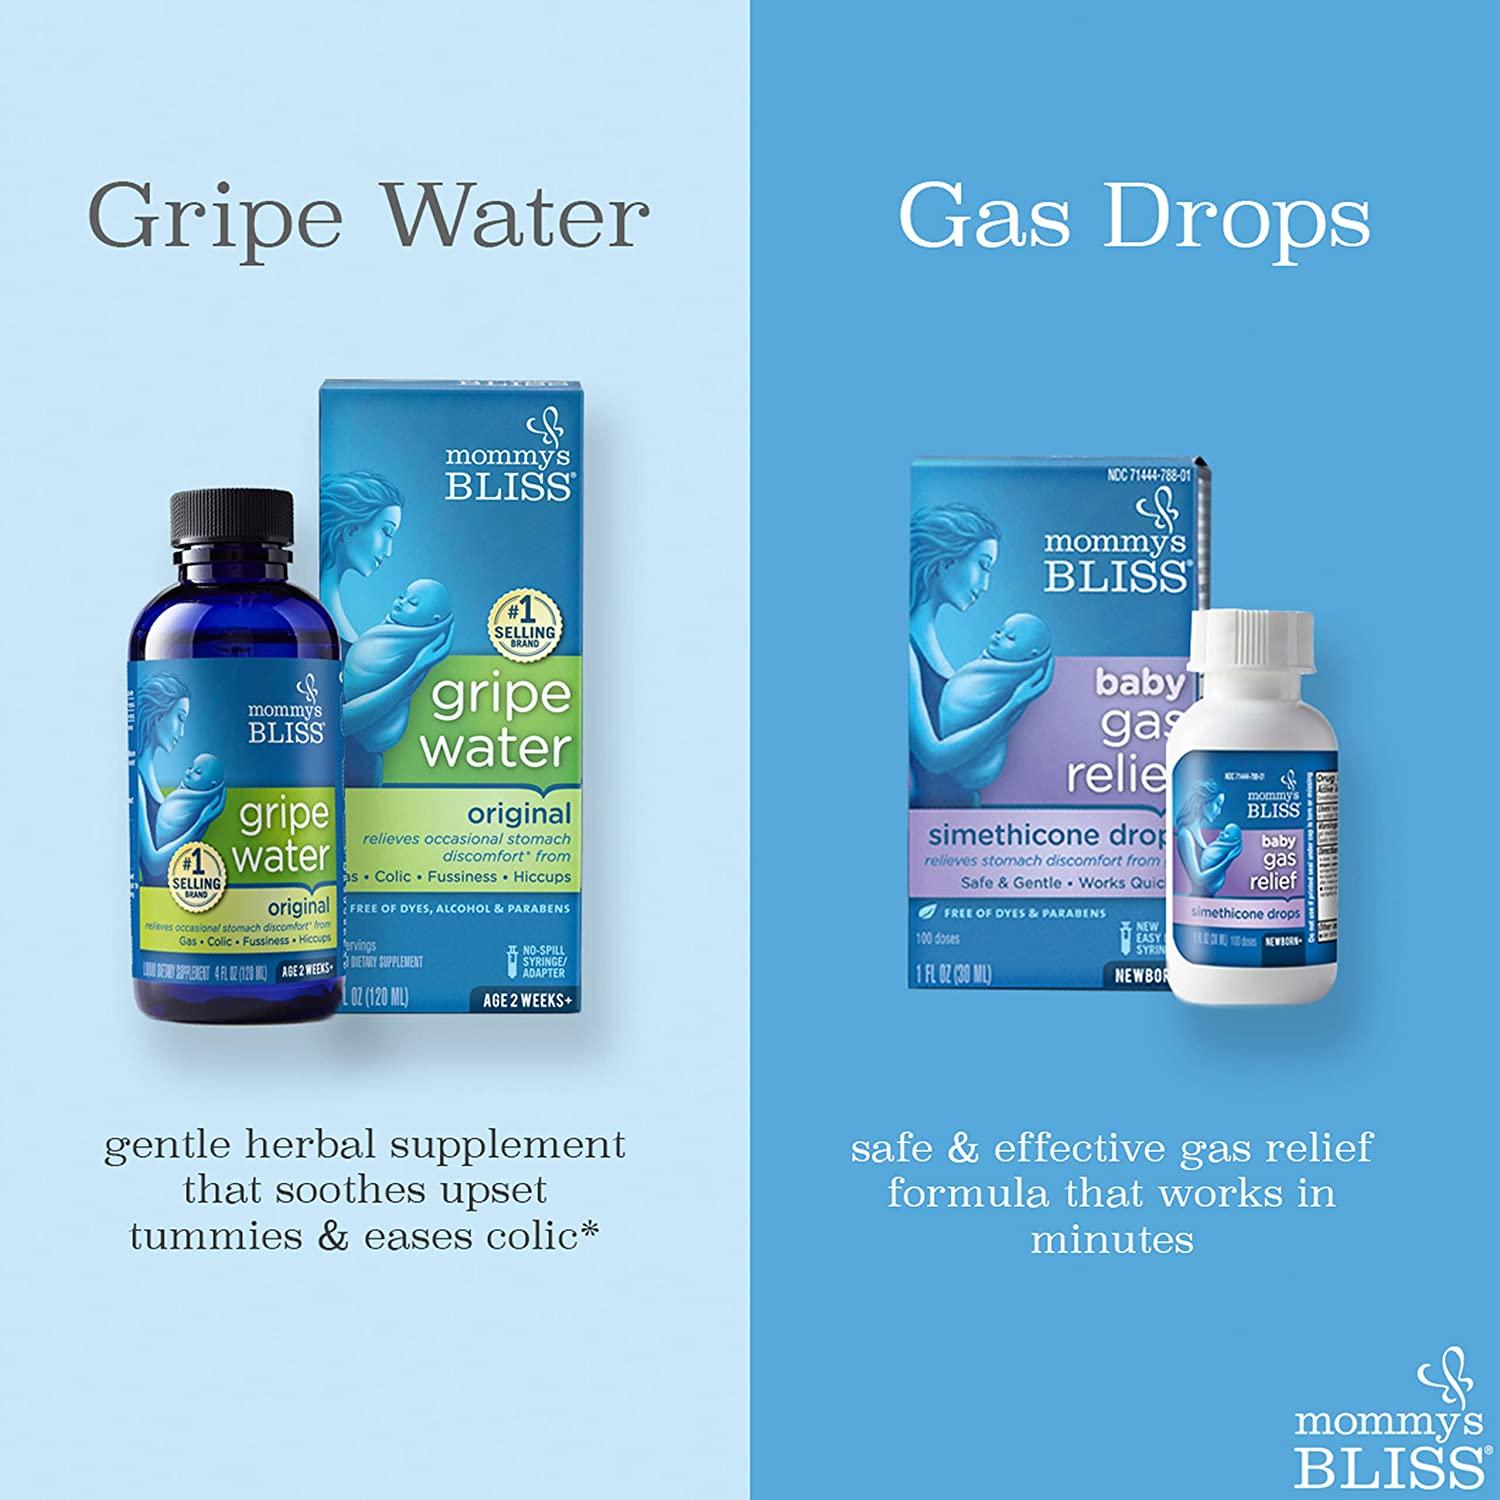 Mommy's Bliss Gripe Water Original, Relieves Stomach Discomfort